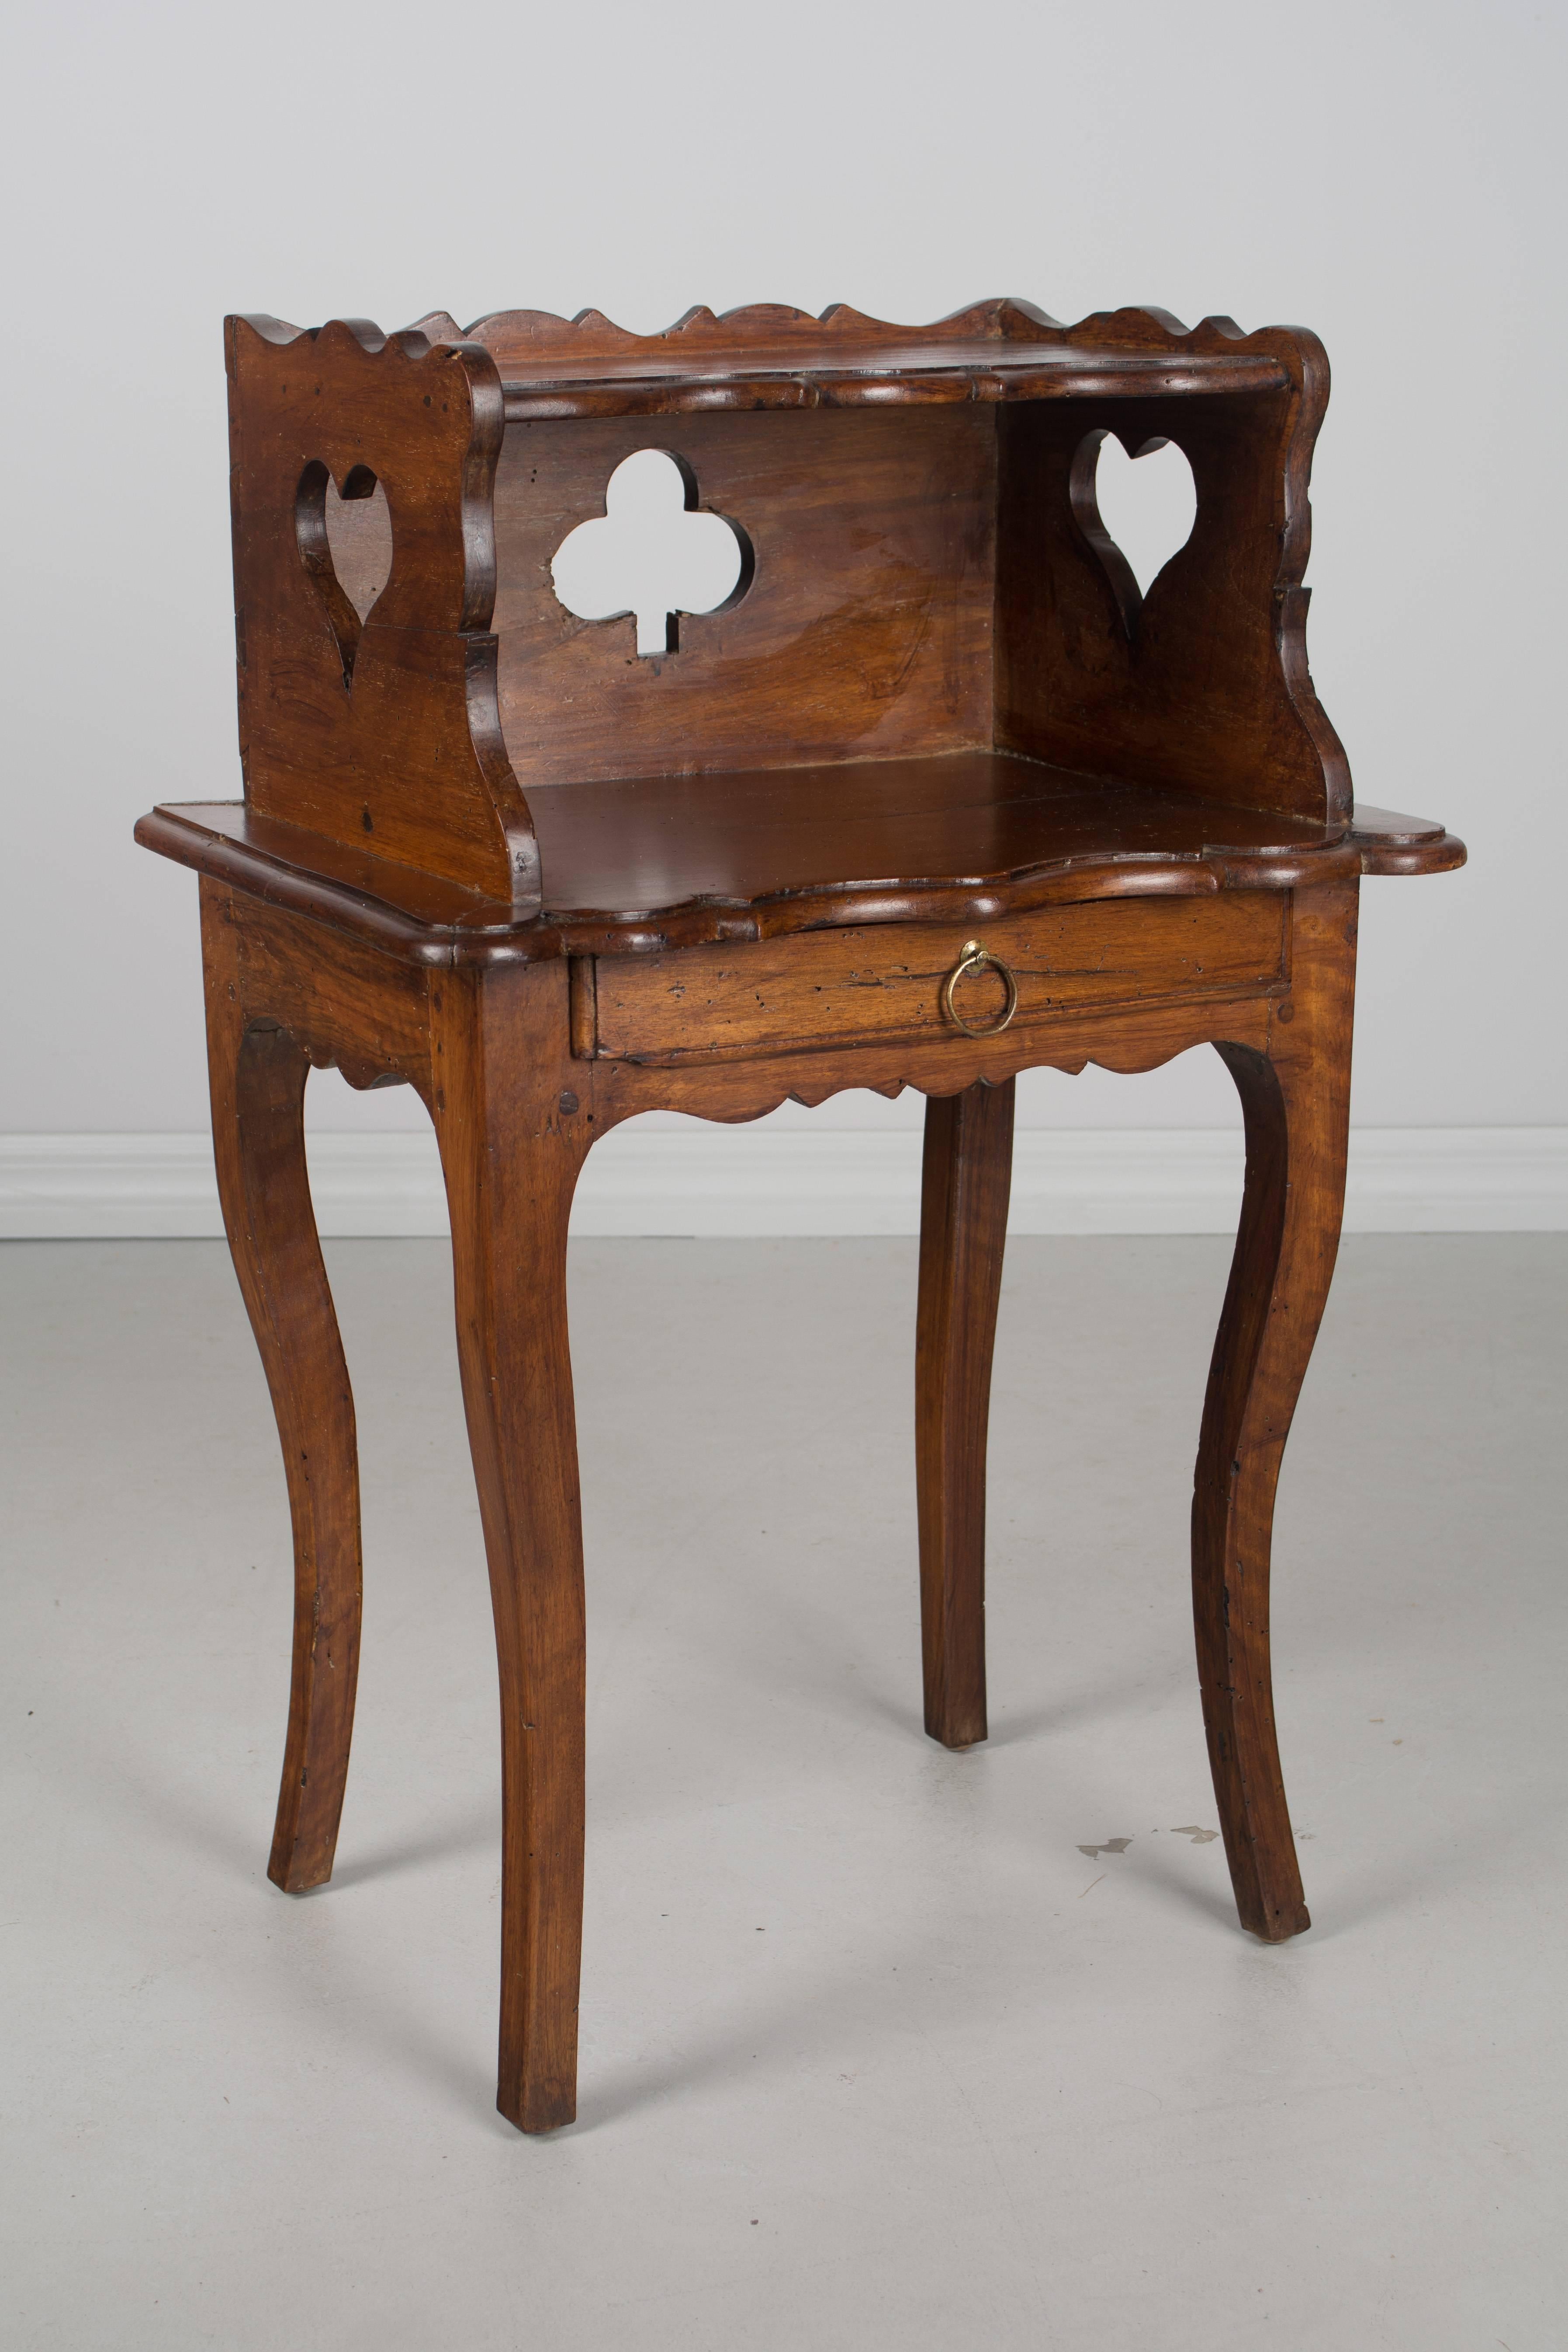 A late 18th century Louis XV country French side table or nightstand made of solid walnut, with pierced cloverleaf on back and pierced hearts on the sides. Scalloped apron and gallery surrounding the upper shelf. Small dovetailed drawer with brass